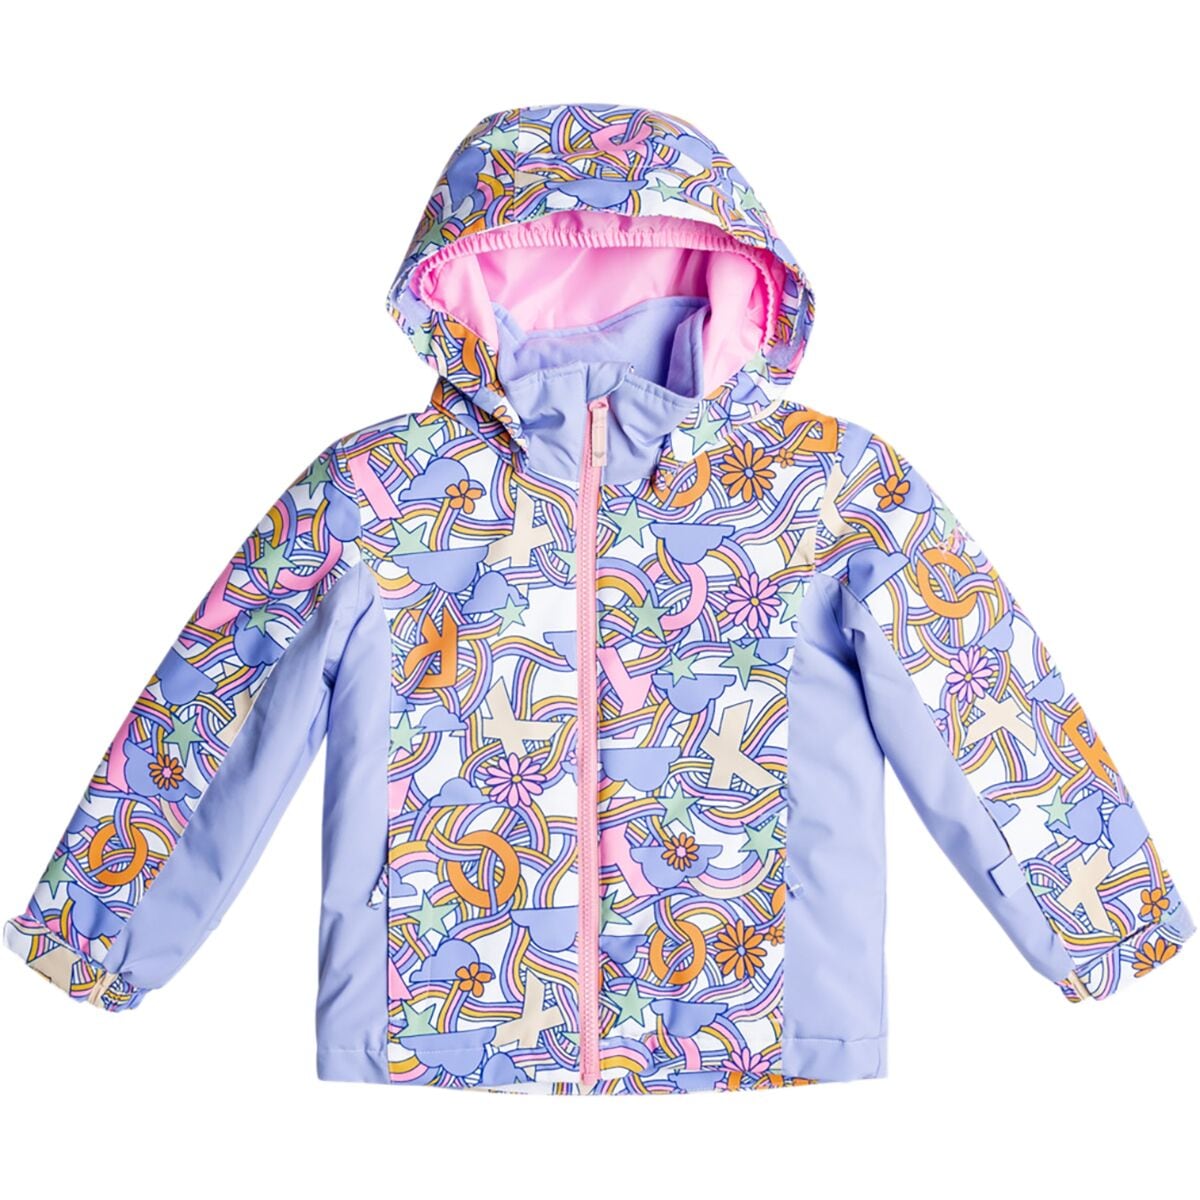 Roxy Snowy Tale Jacket - Toddler Girls' Bright White Big Deal